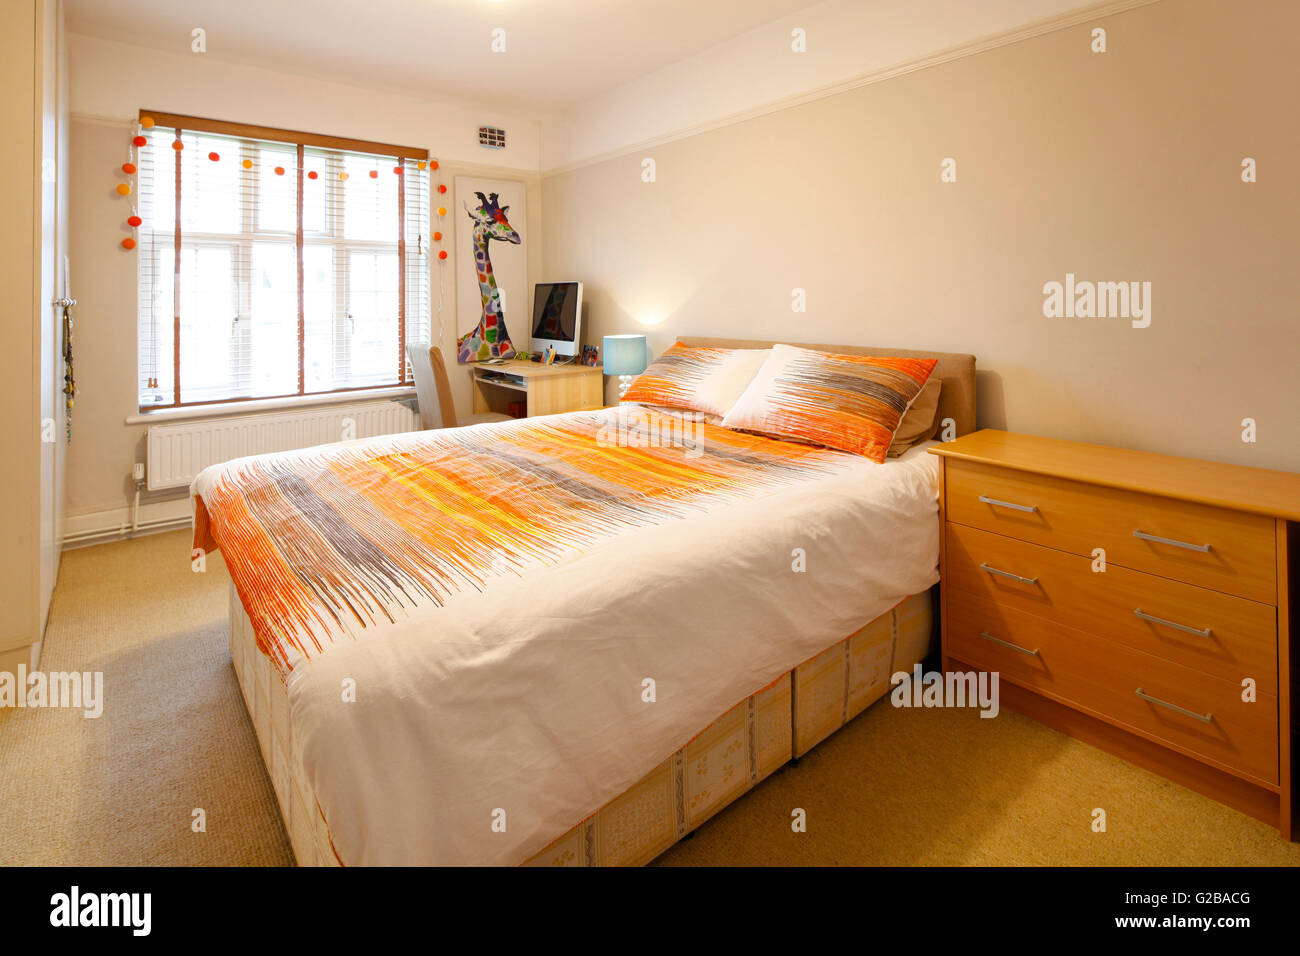 Creighton House, North London. Traditional bedroom with minimal furniture and decoration. Stock Photo